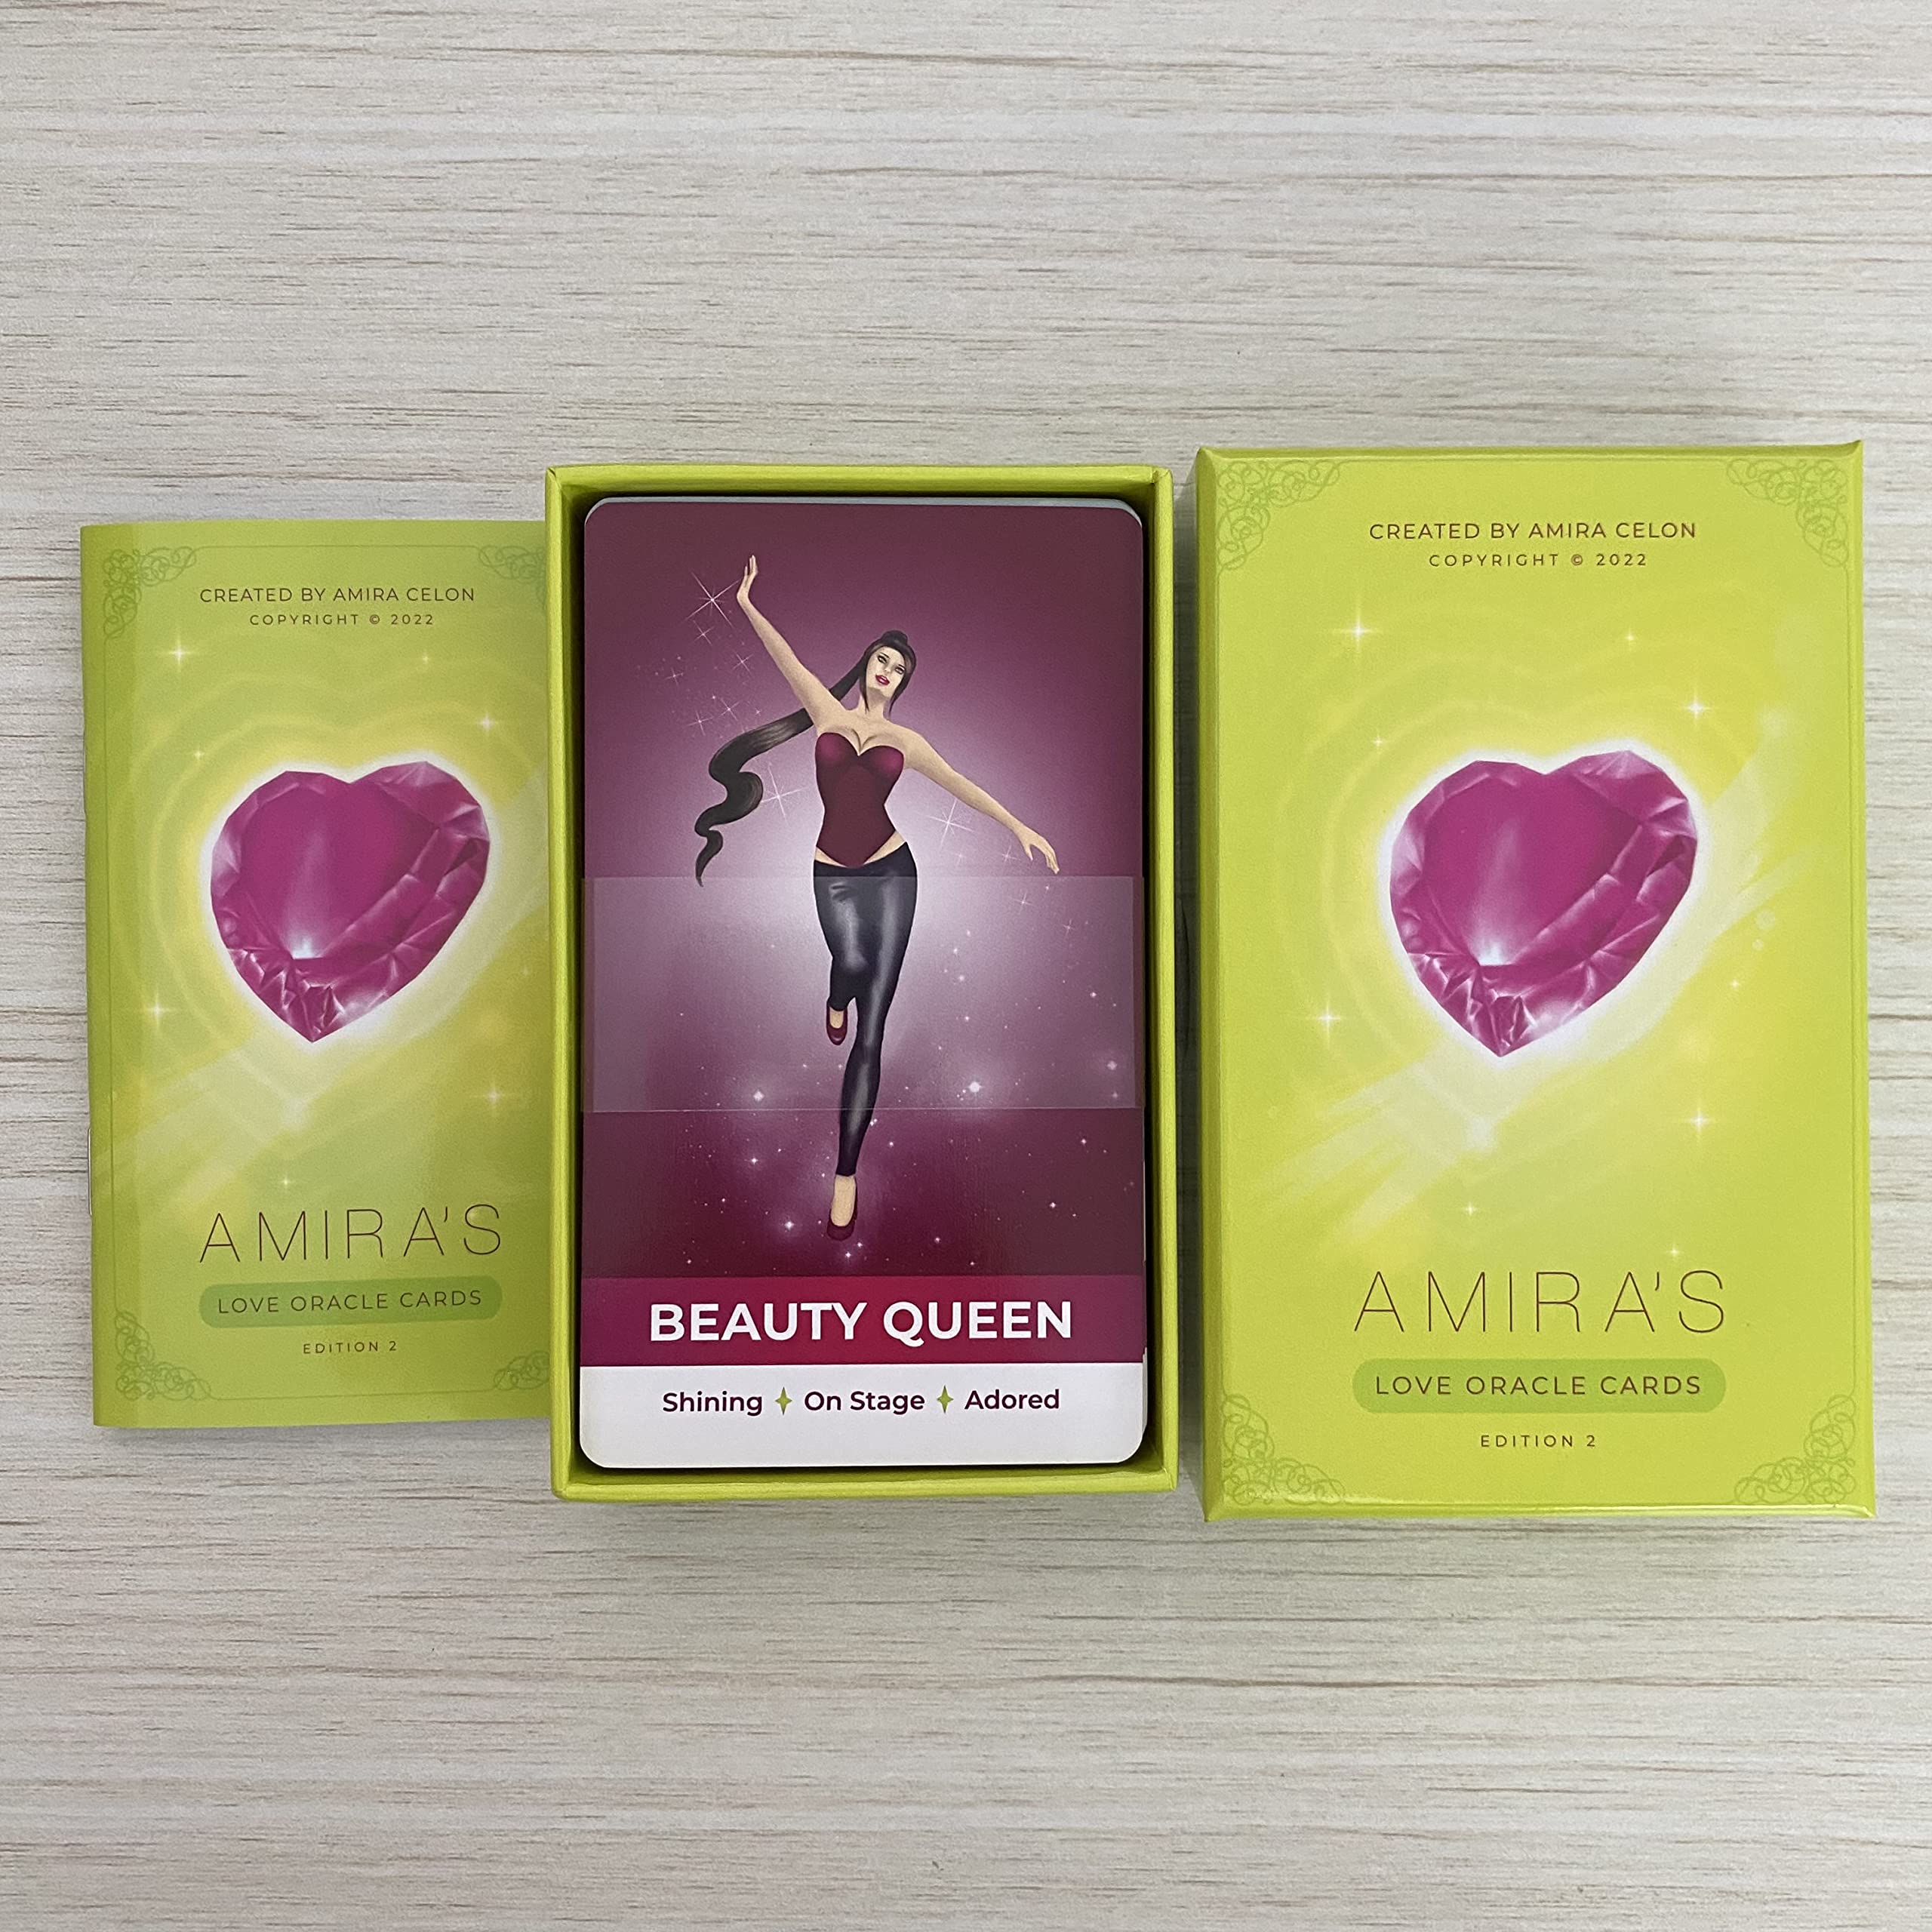 Amira's Love Oracle Cards